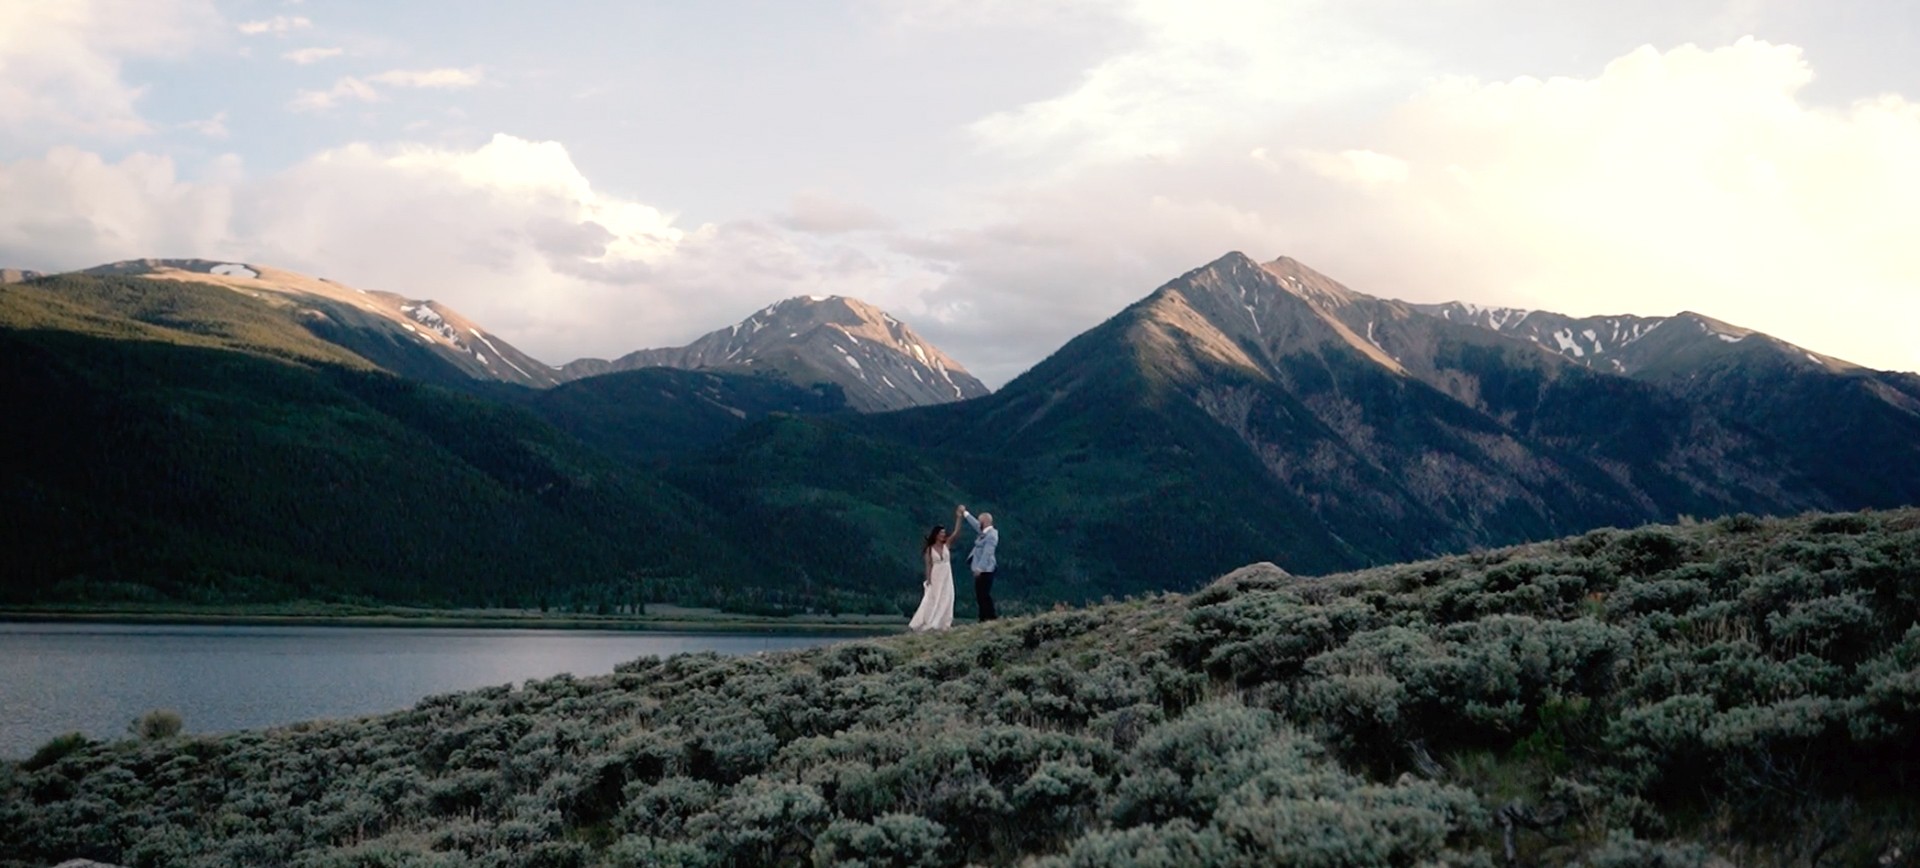 Colorado Adventure WEdding in the Rocky Mountains - bride and groom in epic scenery